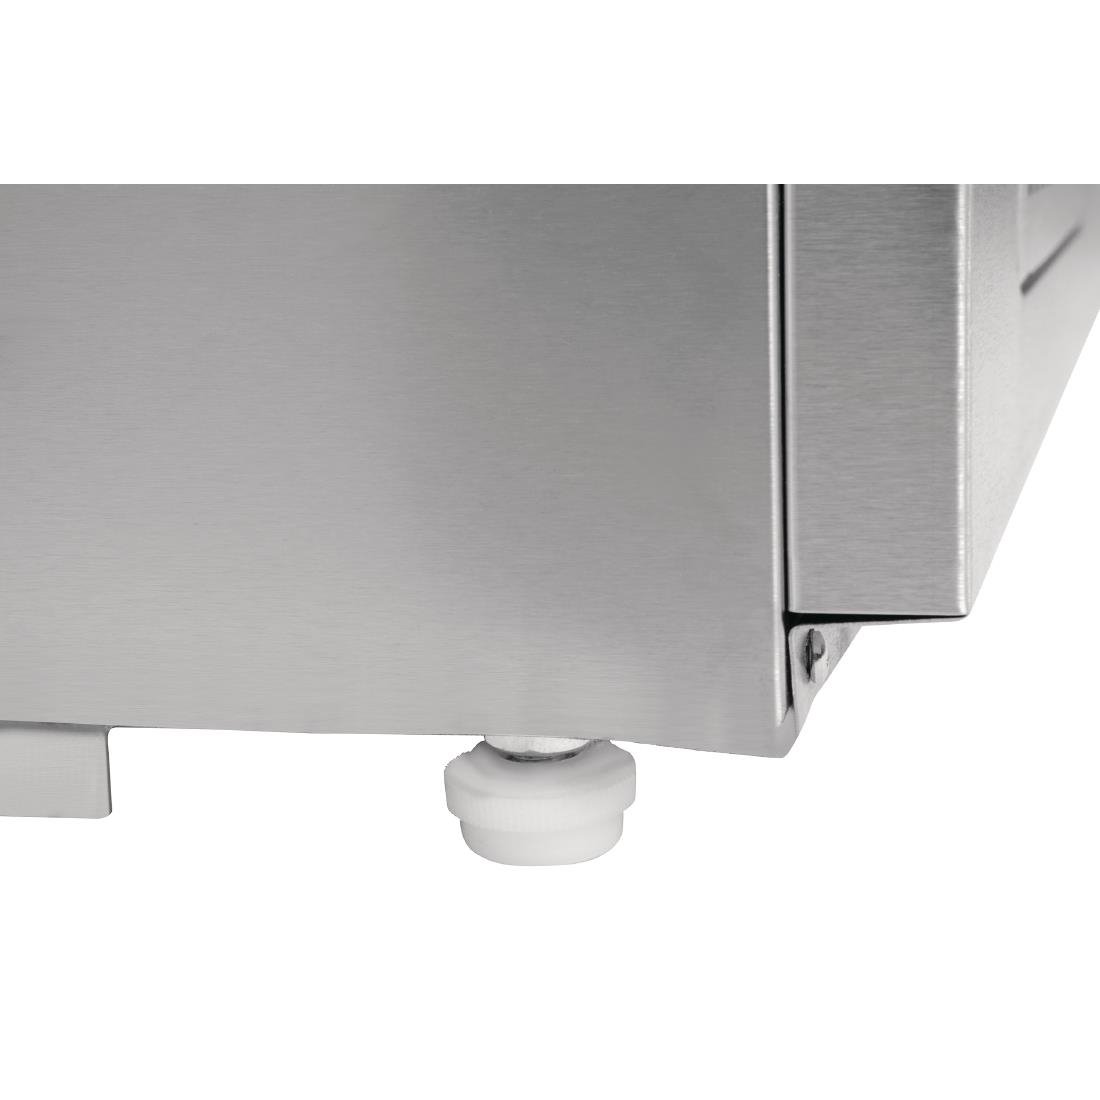 GH267 Polar G-Series 3 Door Pizza Prep Counter with Glass Sneeze Guard 436Ltr JD Catering Equipment Solutions Ltd